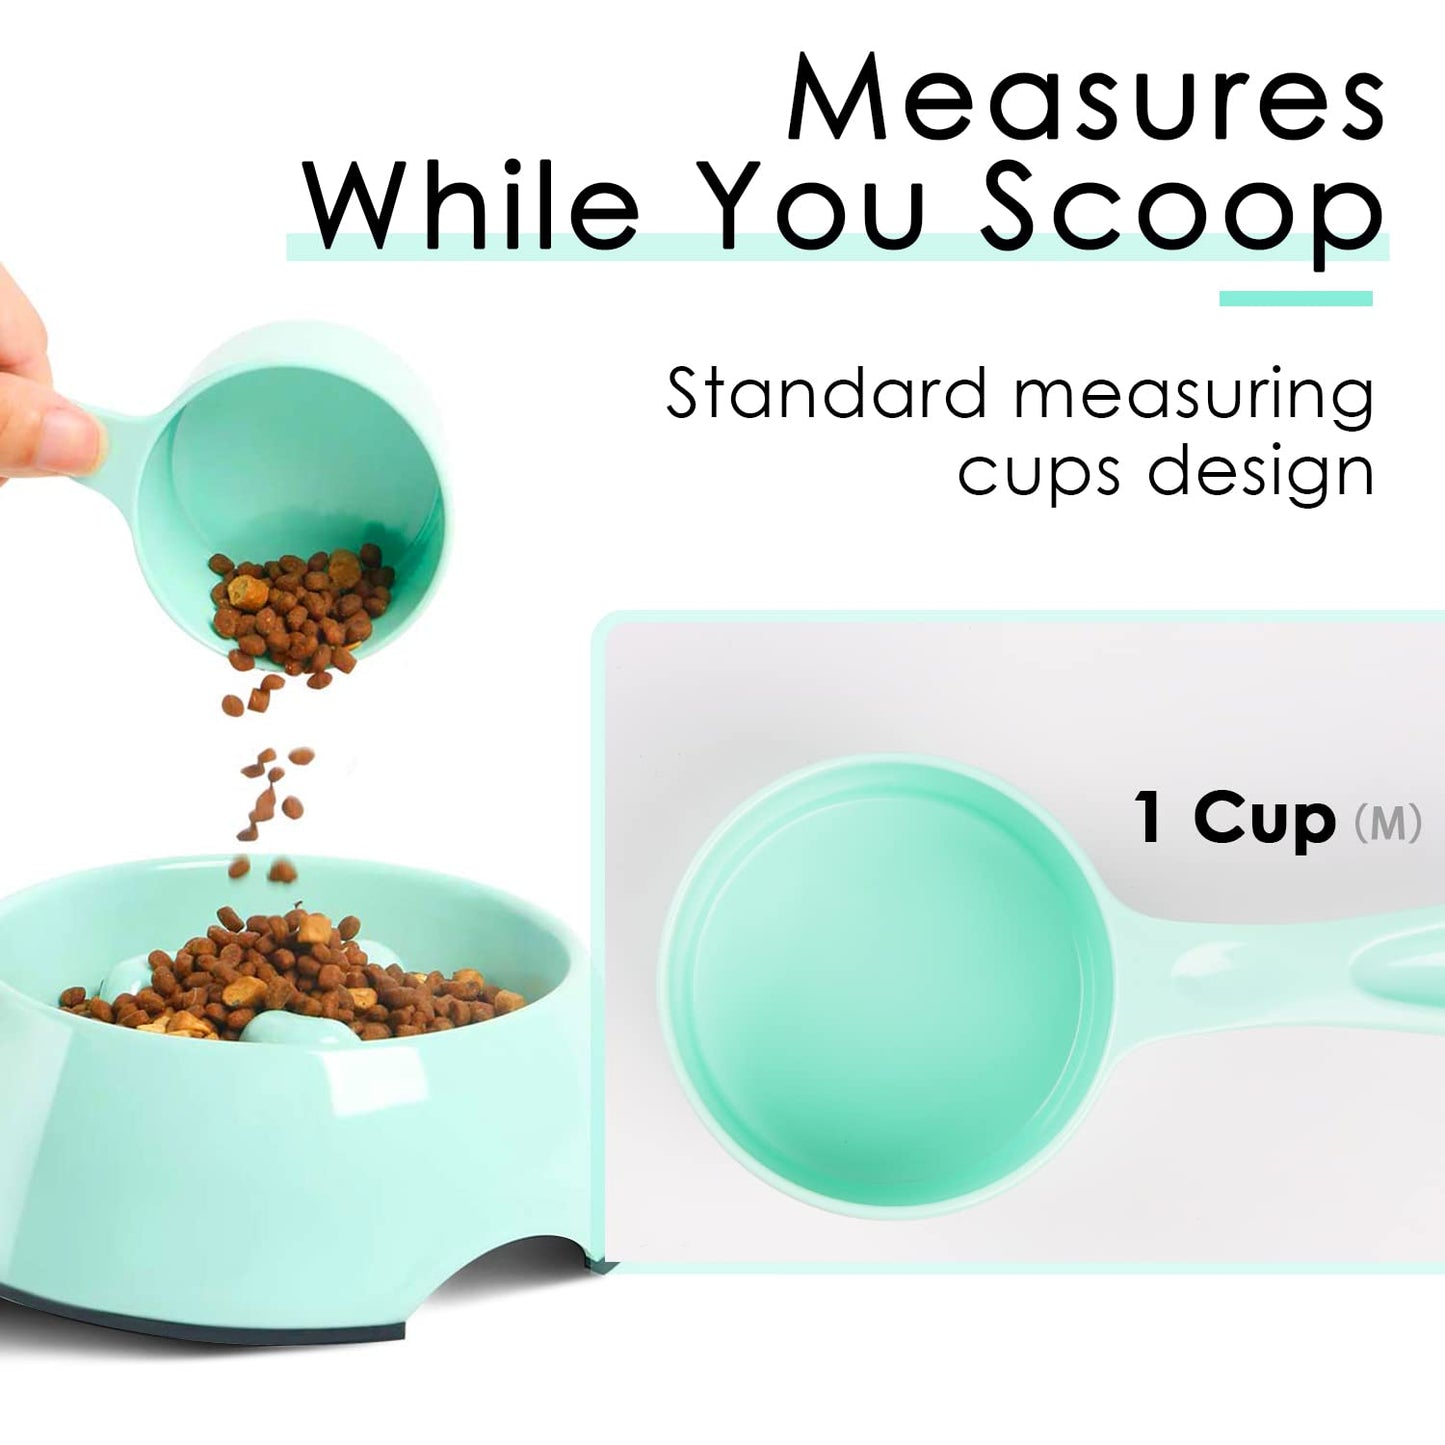 Super Design 1 Cup Dog Food Scoop for Container Melamine Measuring Scoop for Dogs Cats Birds and Rabbits Pet Food Feeding Scoop Dishwasher Safe - Baby Green